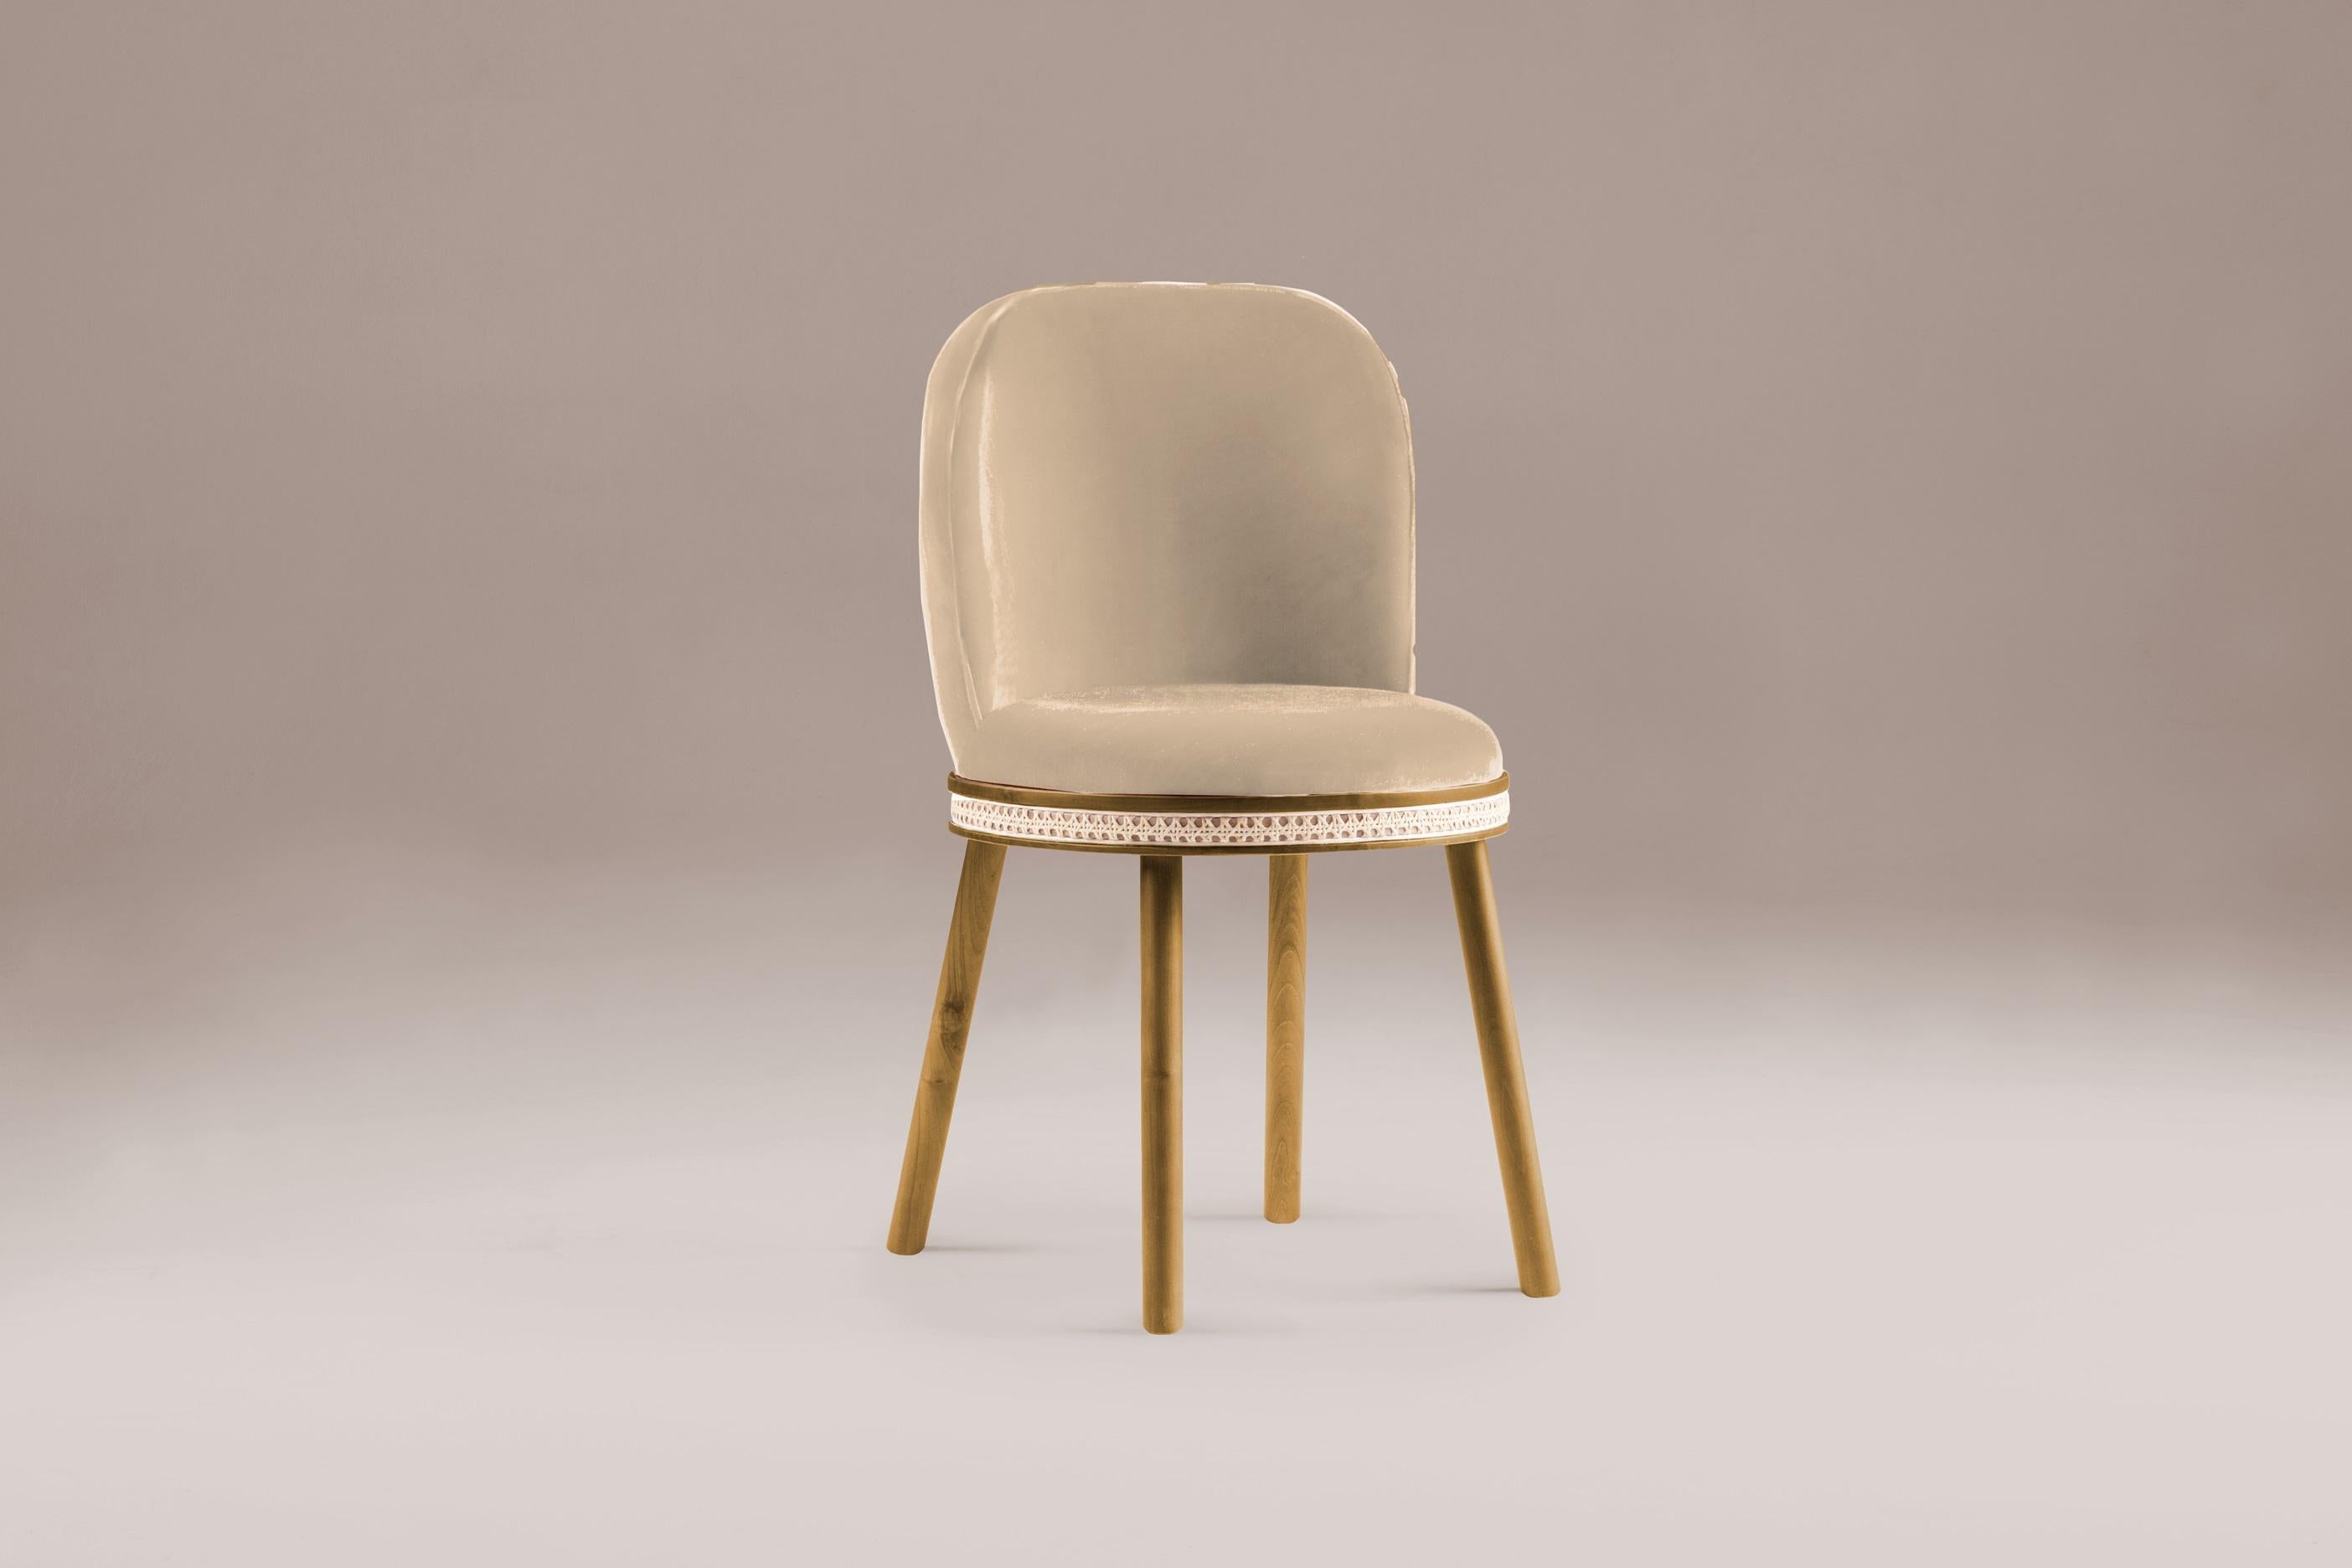 DOOQ Mid-Century Modern Dining Chair Alma with Beige Velvet and Walnut Wood
In a piece that combines classic and modern aesthetics we can find a certain harmonic gracefulness paired with an intimate voluptuousness that can embrace you and